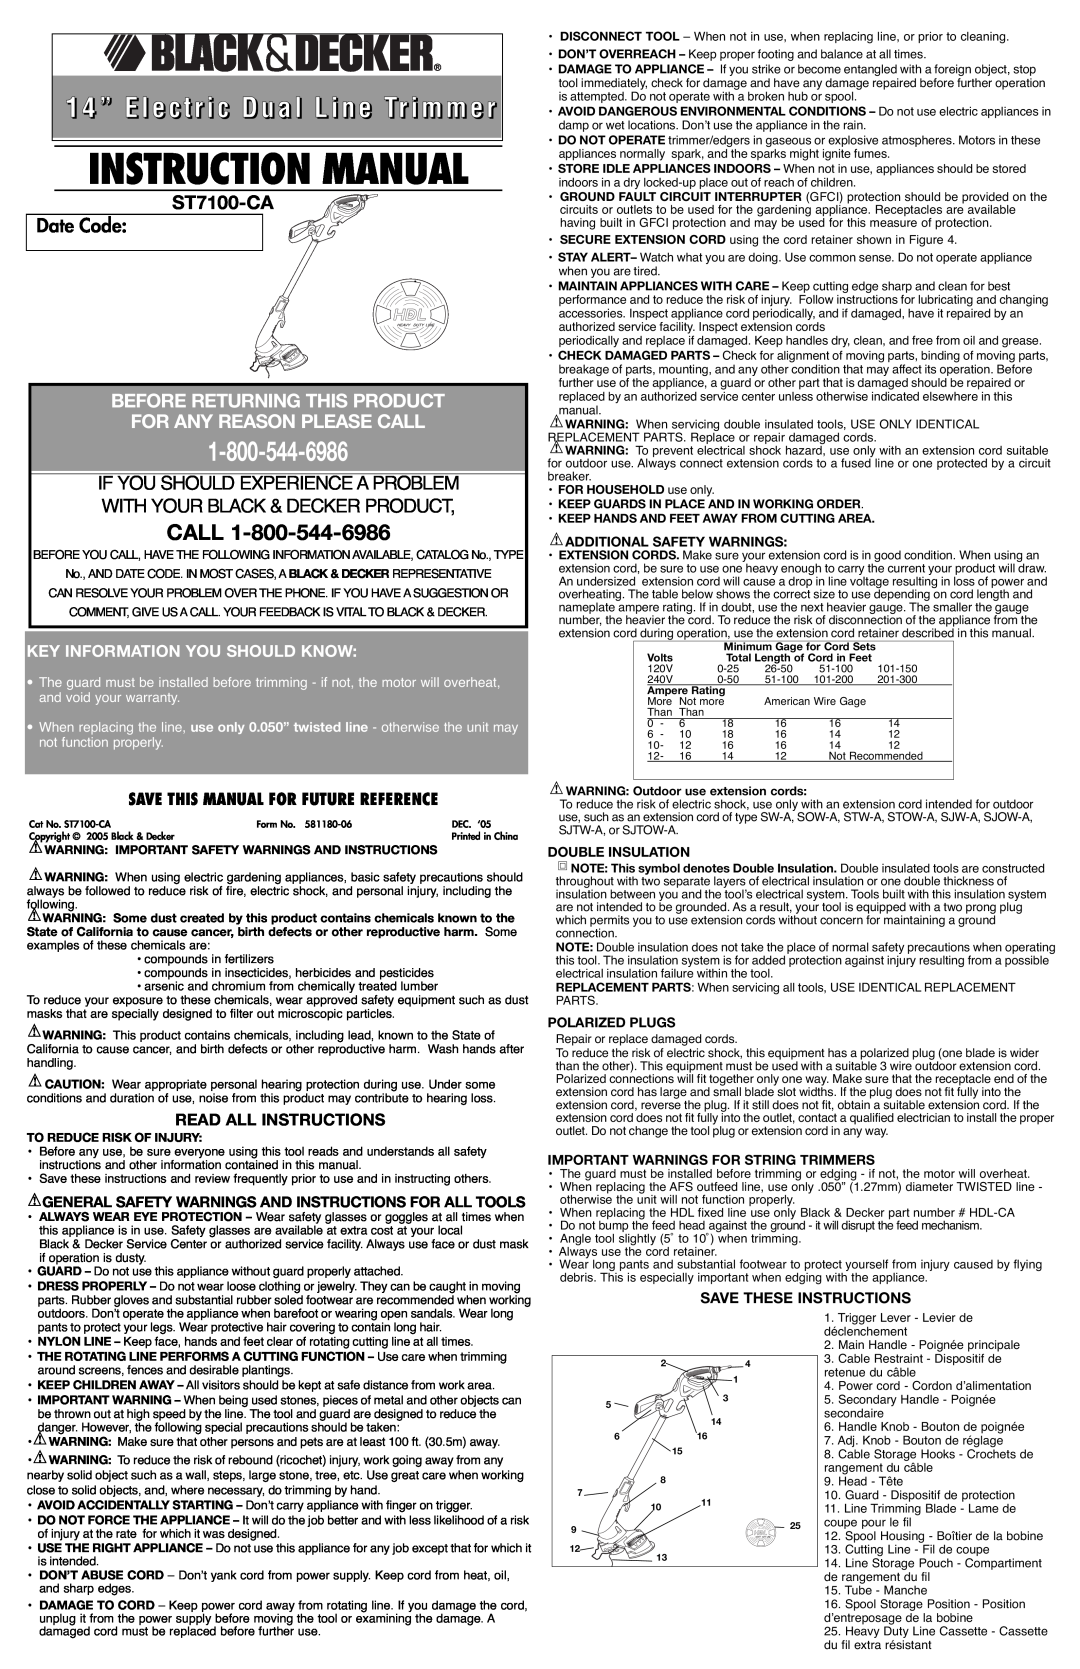 Cobra Electronics ST7100-CA instruction manual Key Information You Should Know, Save This Manual For Future Reference 